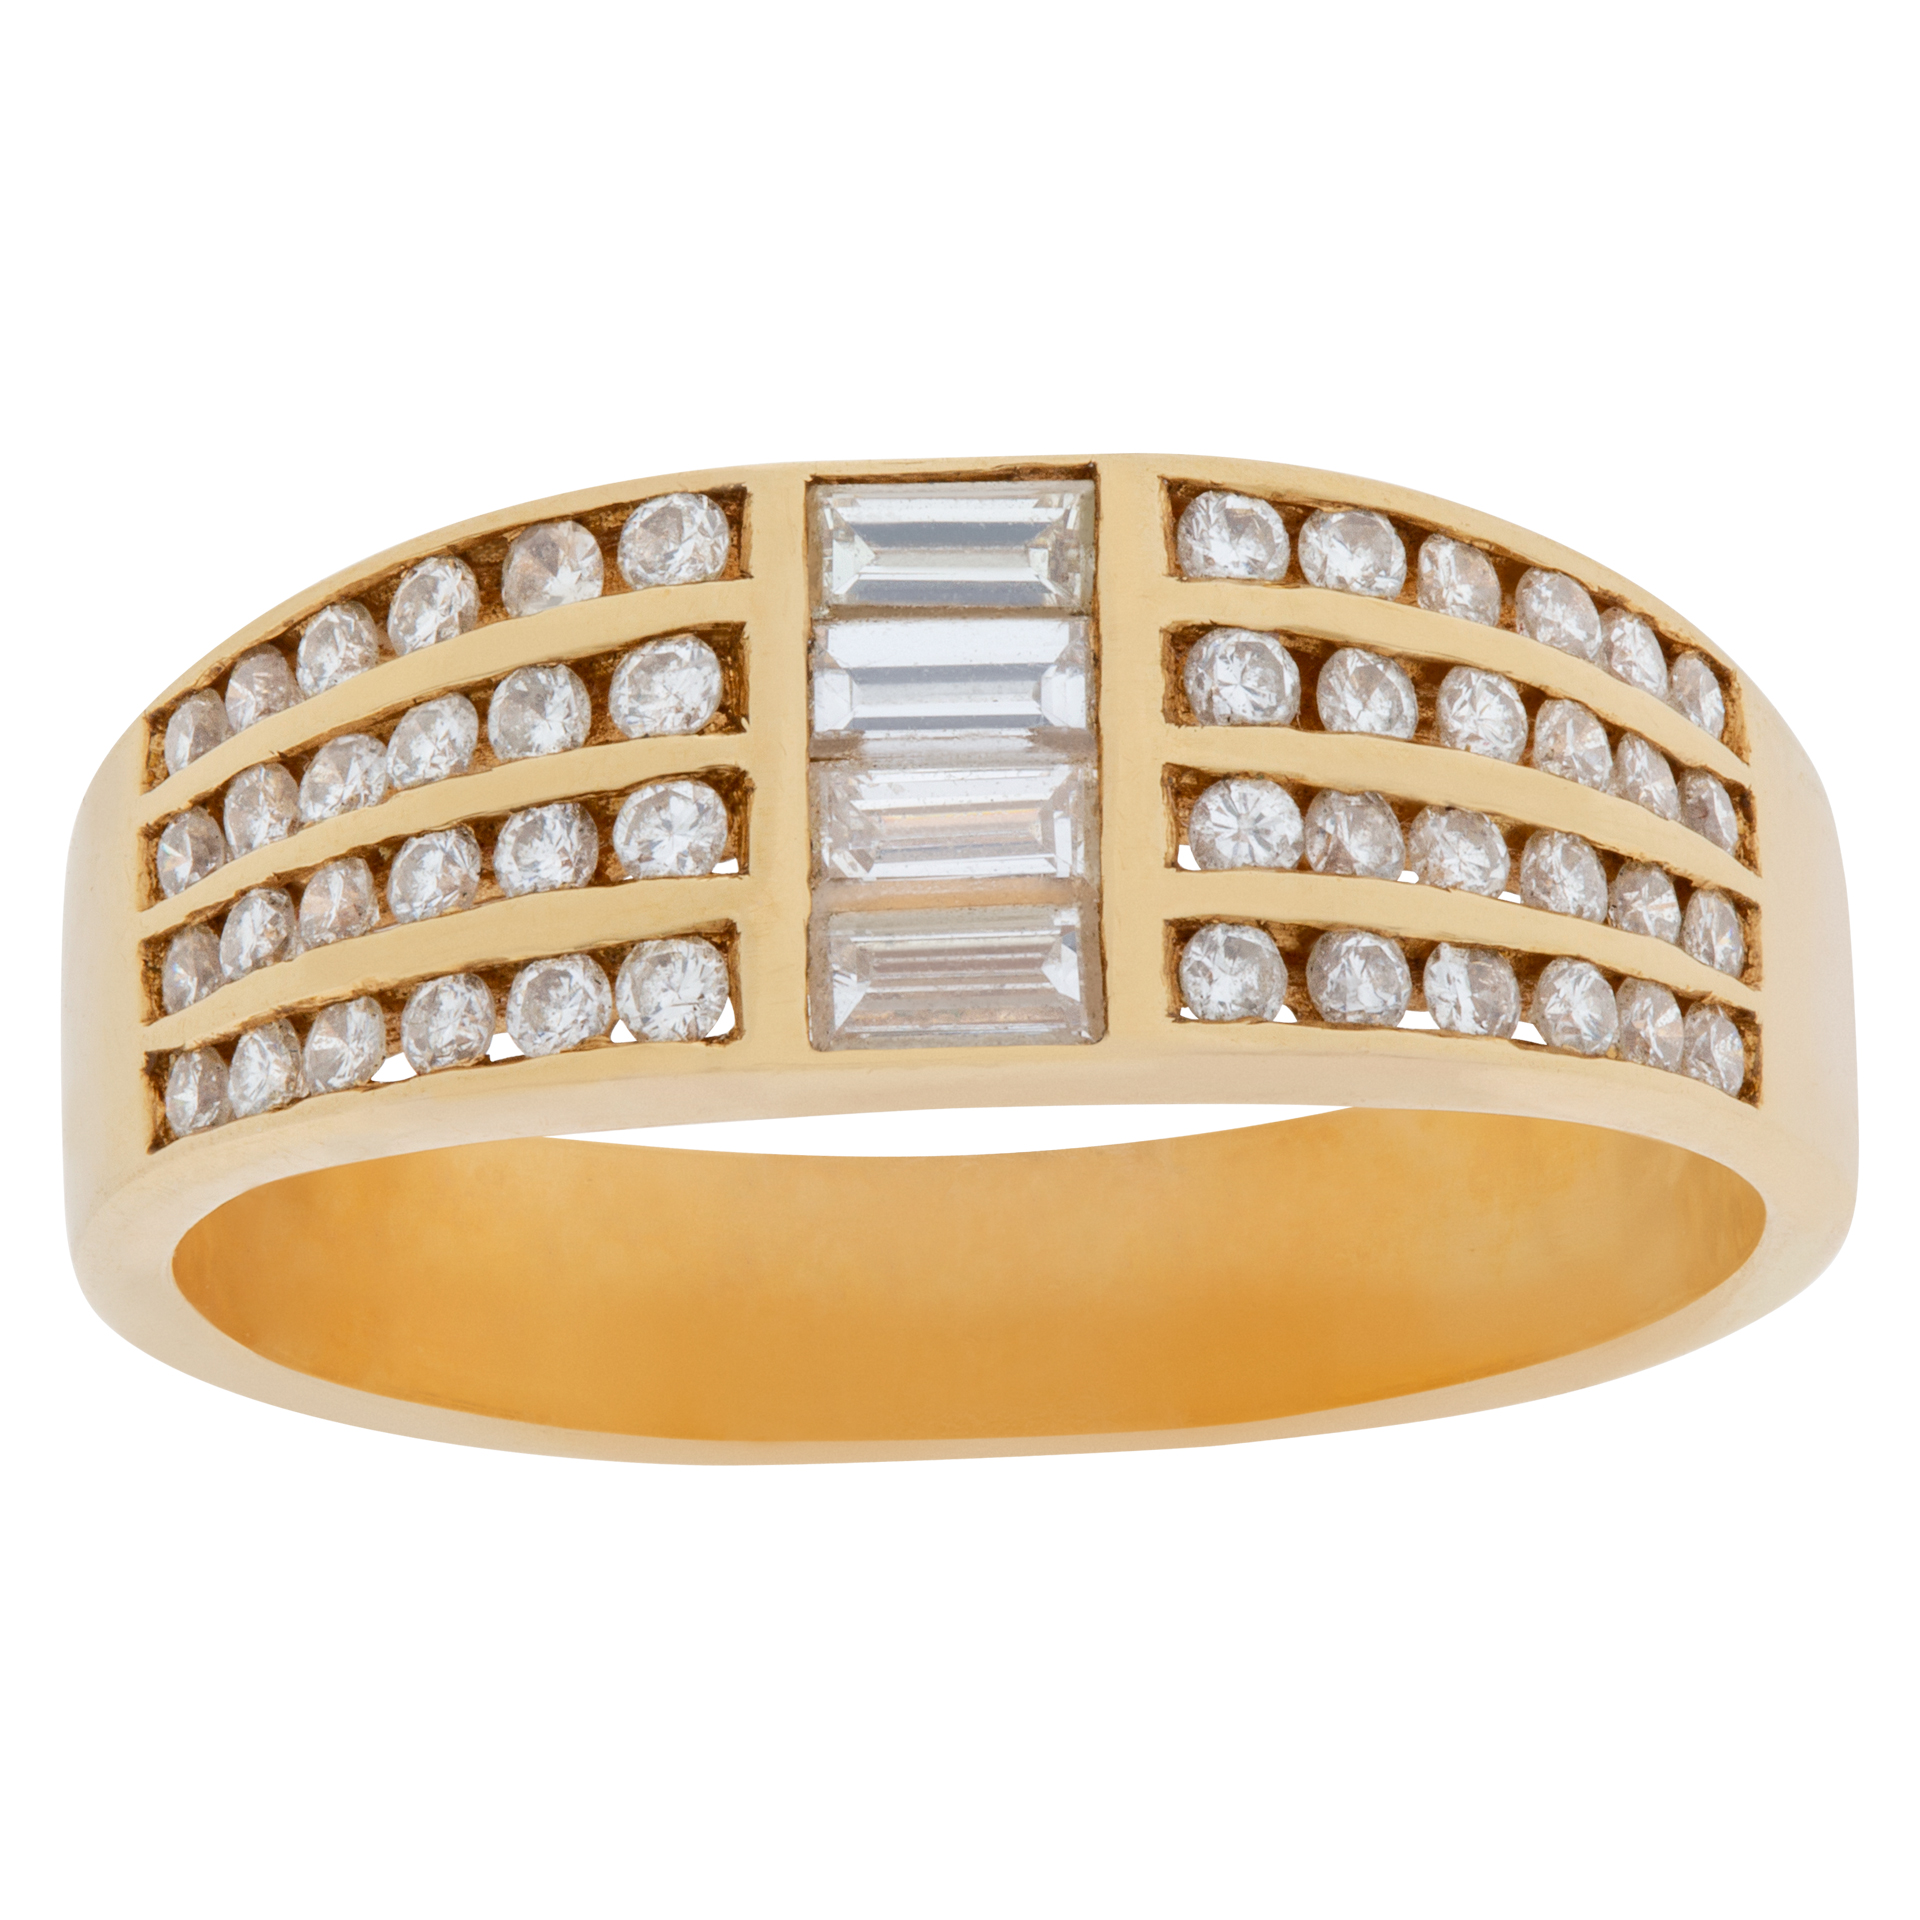 Channel-set baguette & round diamond ring in 14k. 0.70 carats in diamonds image 1